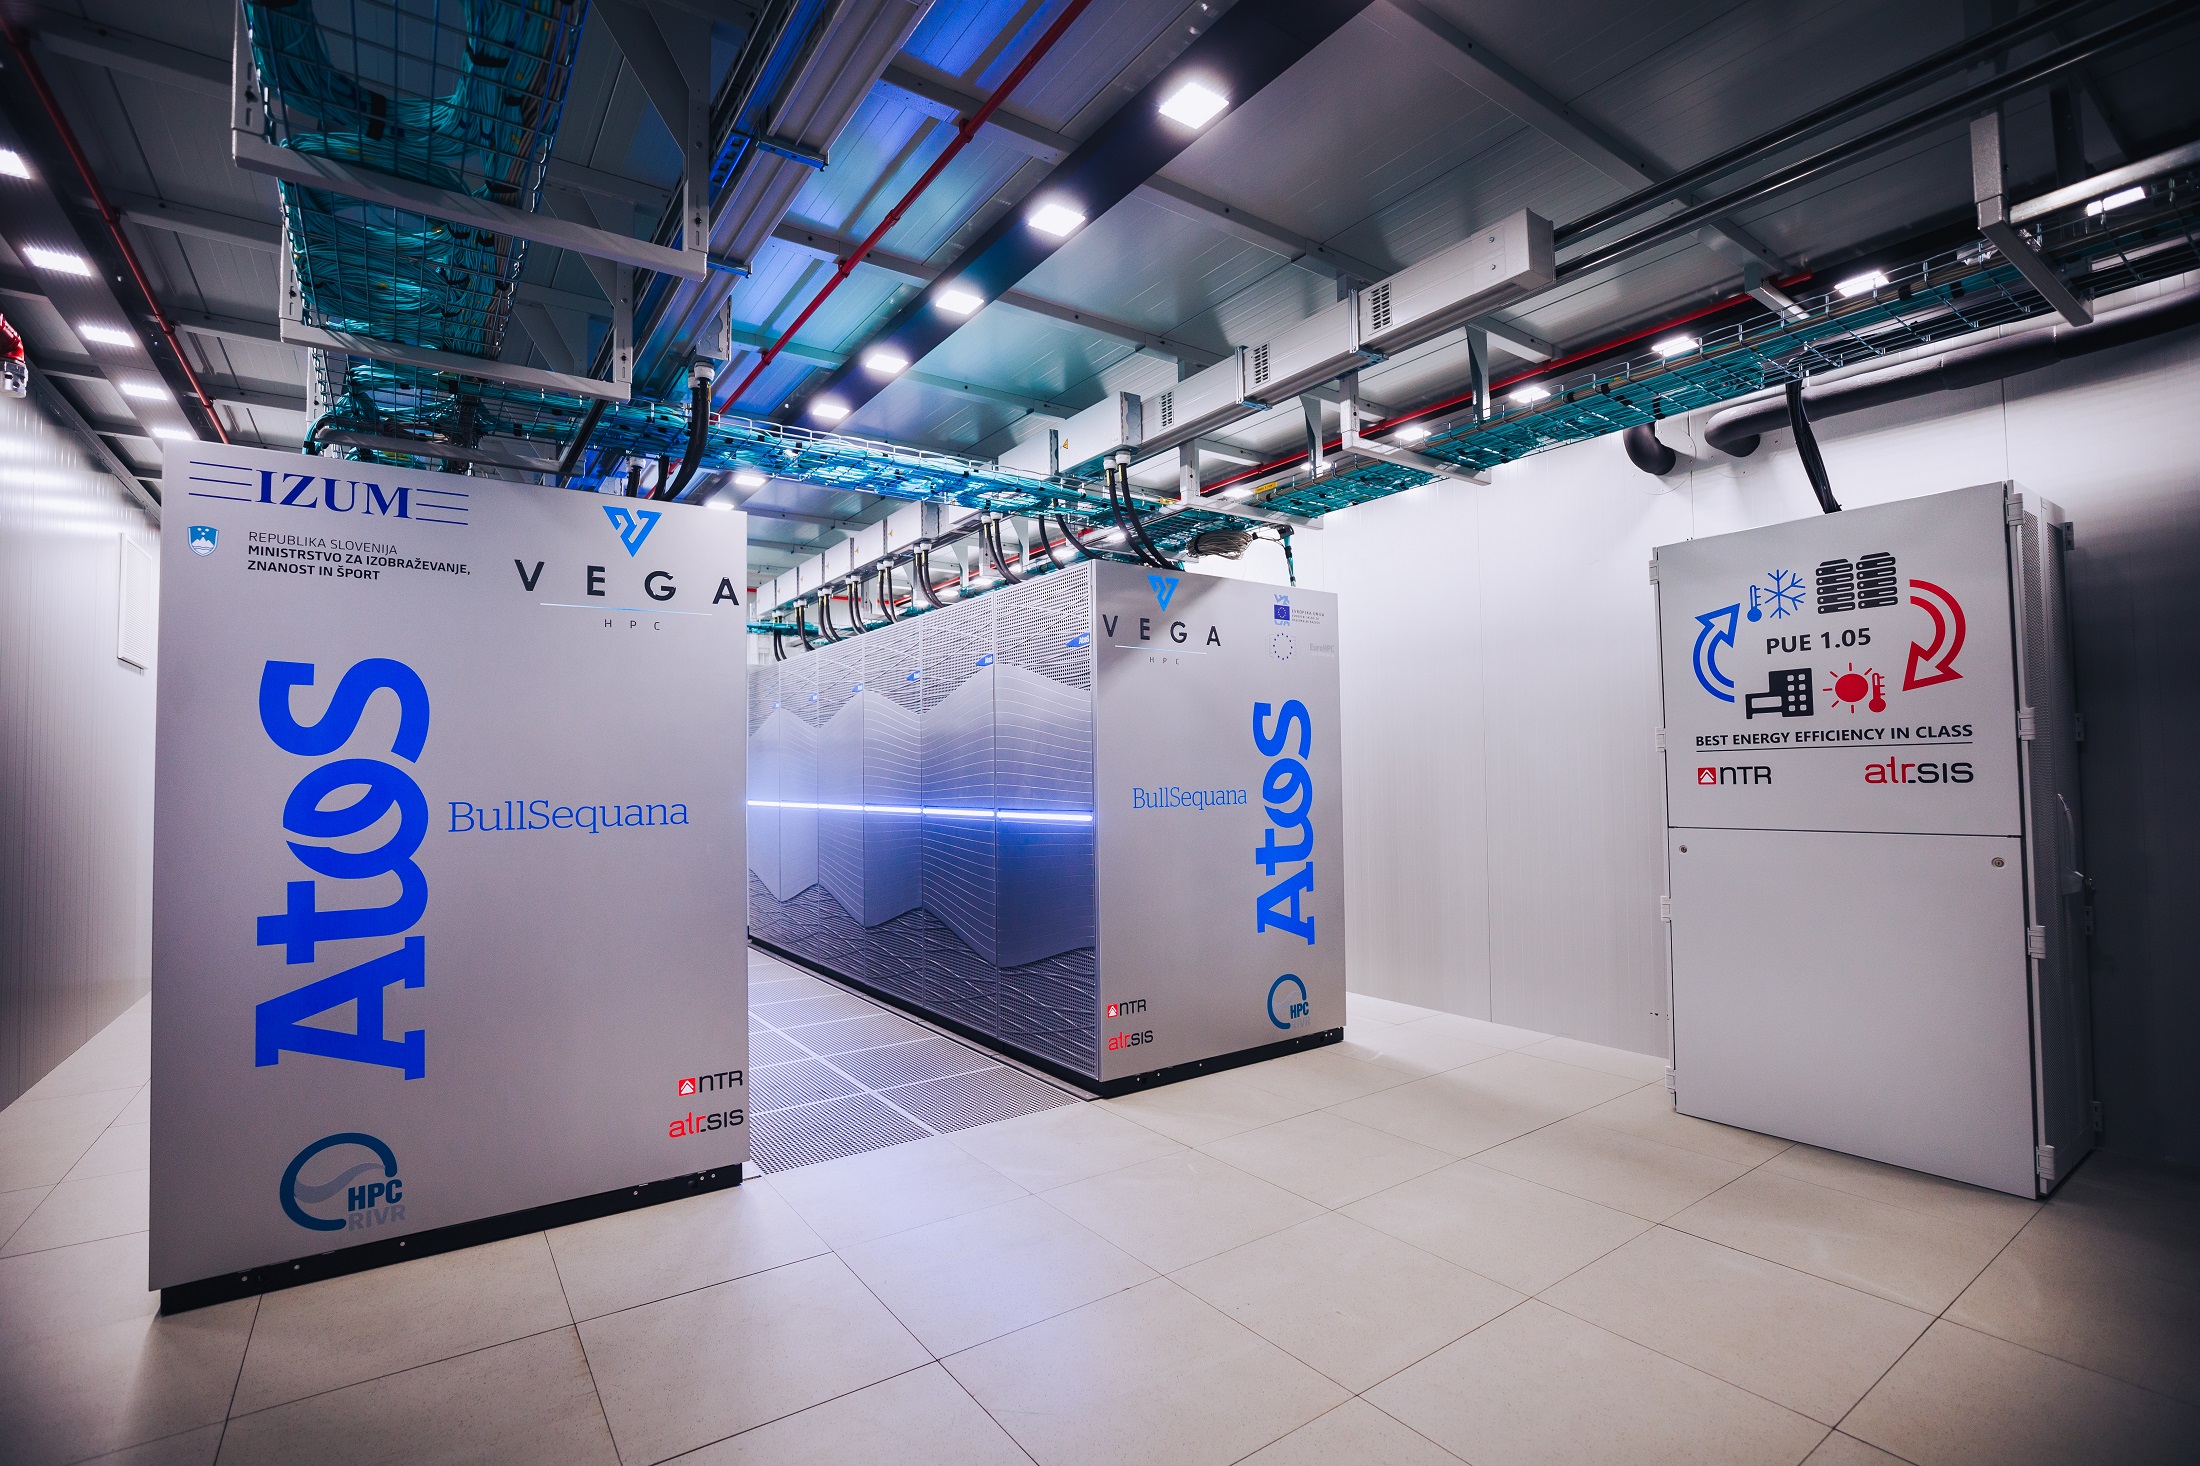 Access to the HPC Vega supercomputer for cancer research using the Vini in silico model of cancer was granted to the group of researchers at Ruđer Bošković Institute, Centre for Informatics and Computing